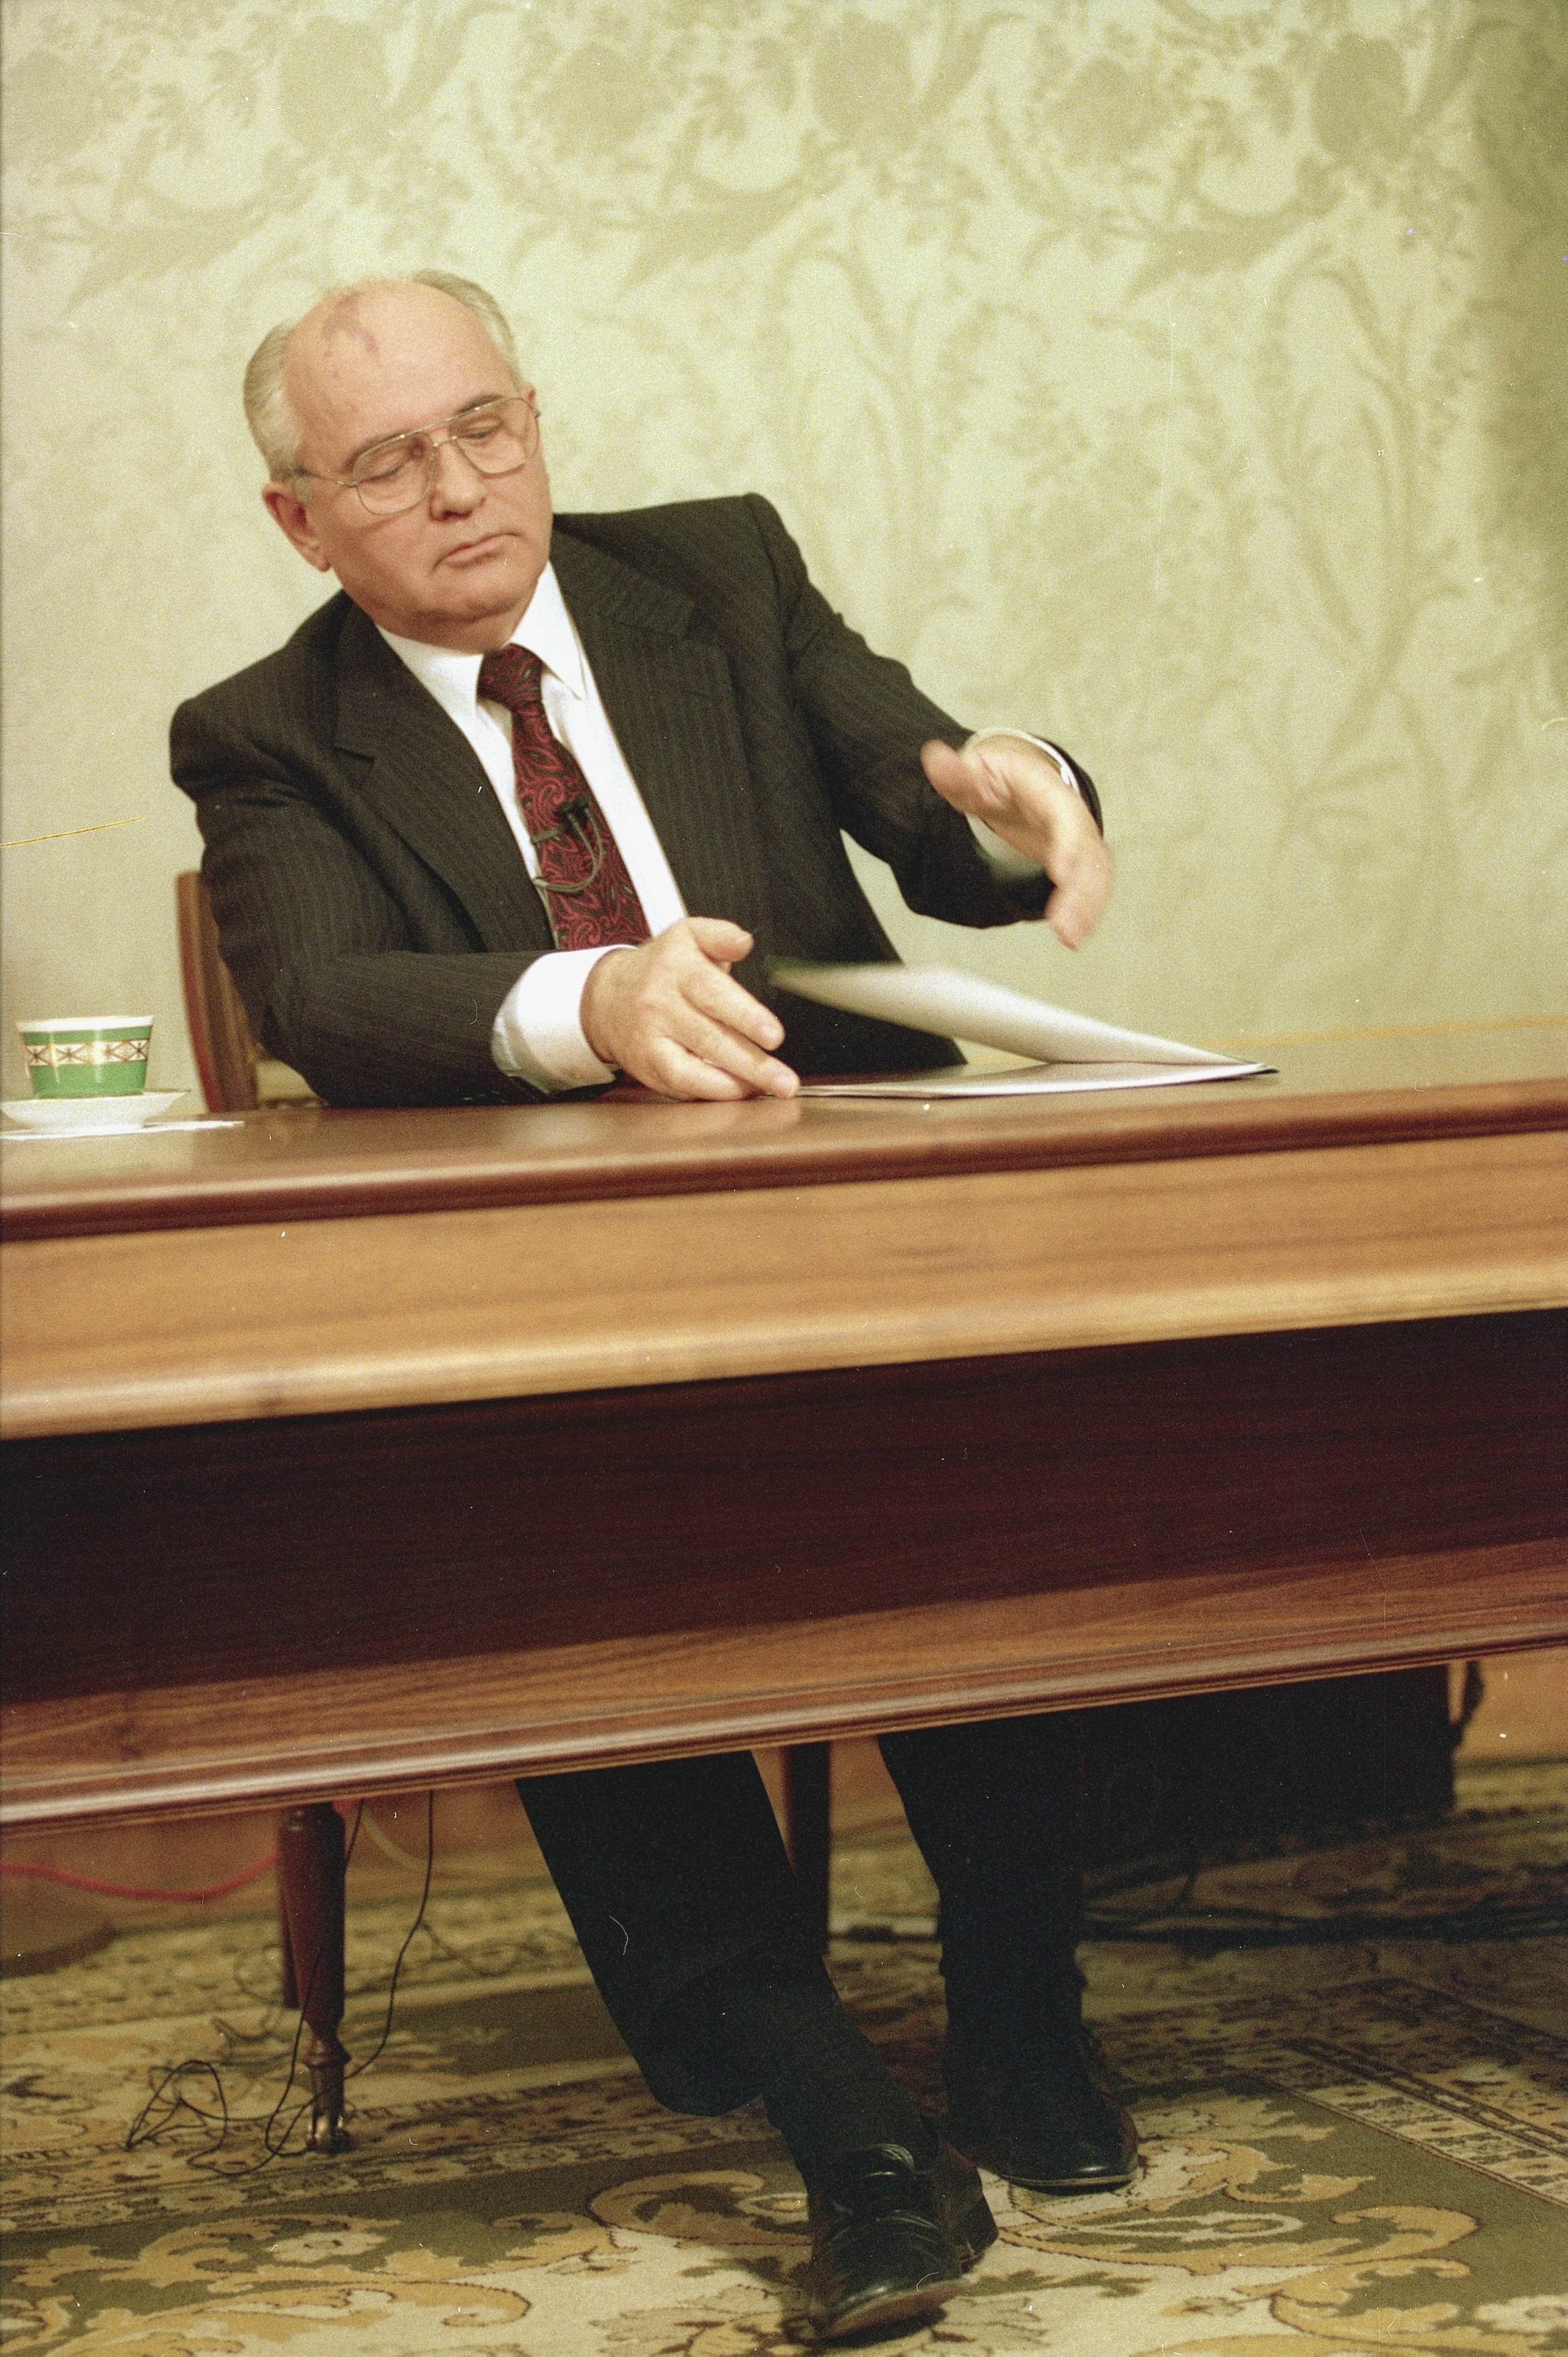 Mikhail Gorbachev, the eighth and final leader of the Soviet Union, closes his resignation speech on the table after delivering it on Soviet television in the Kremlin, Moscow, Wednesday, Dec. 25, 1991. It was a momentous event that ended an era 30 years ago. (AP Photo/Liu Heung Shing, File)